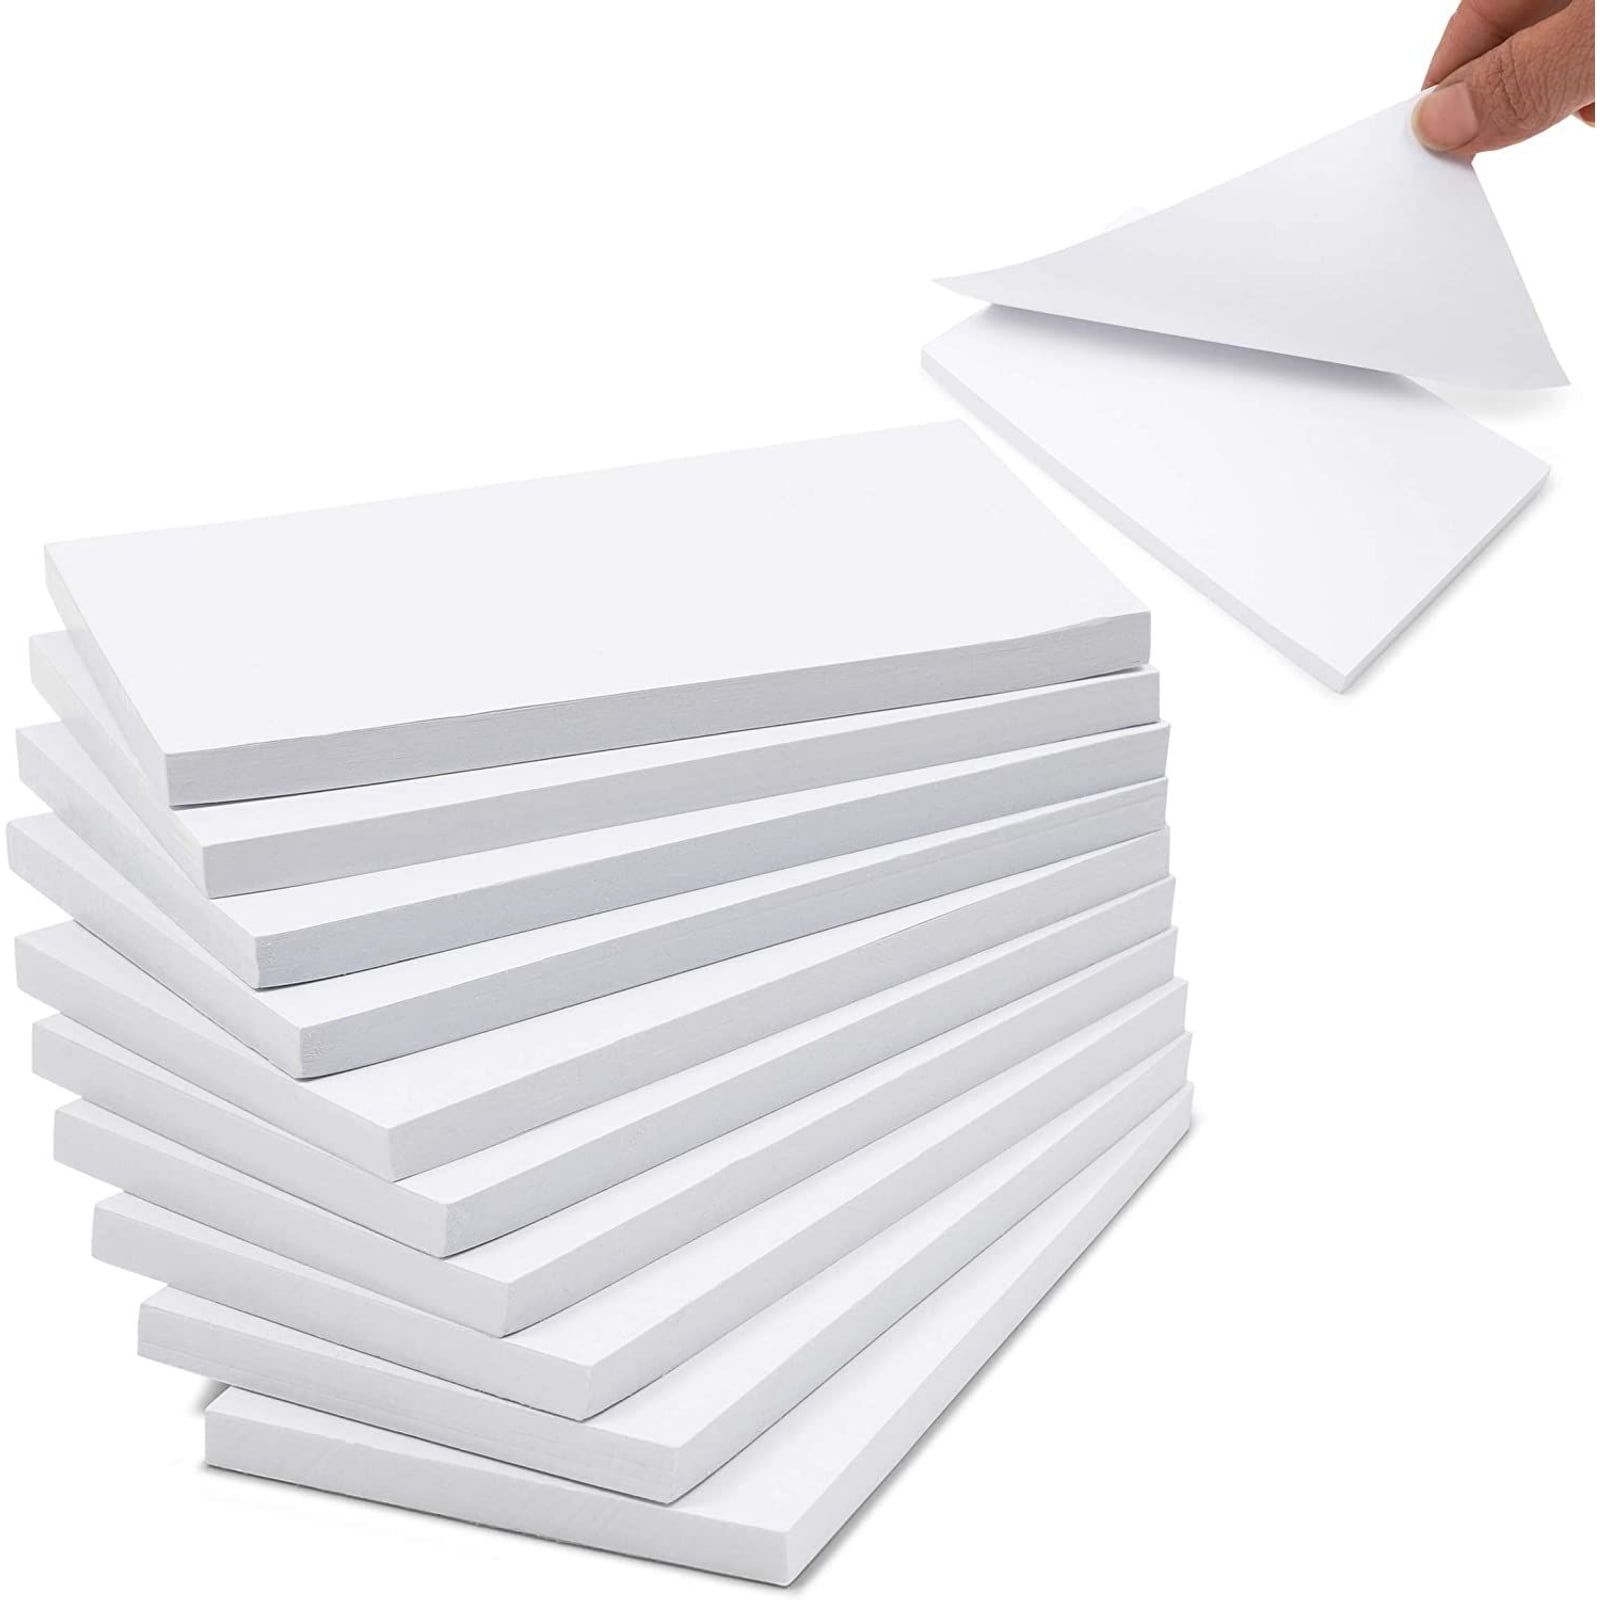 Memo Pads Note Scratch Writing Pads 10 With 50 Sheets Each 4 X 6 Inches 